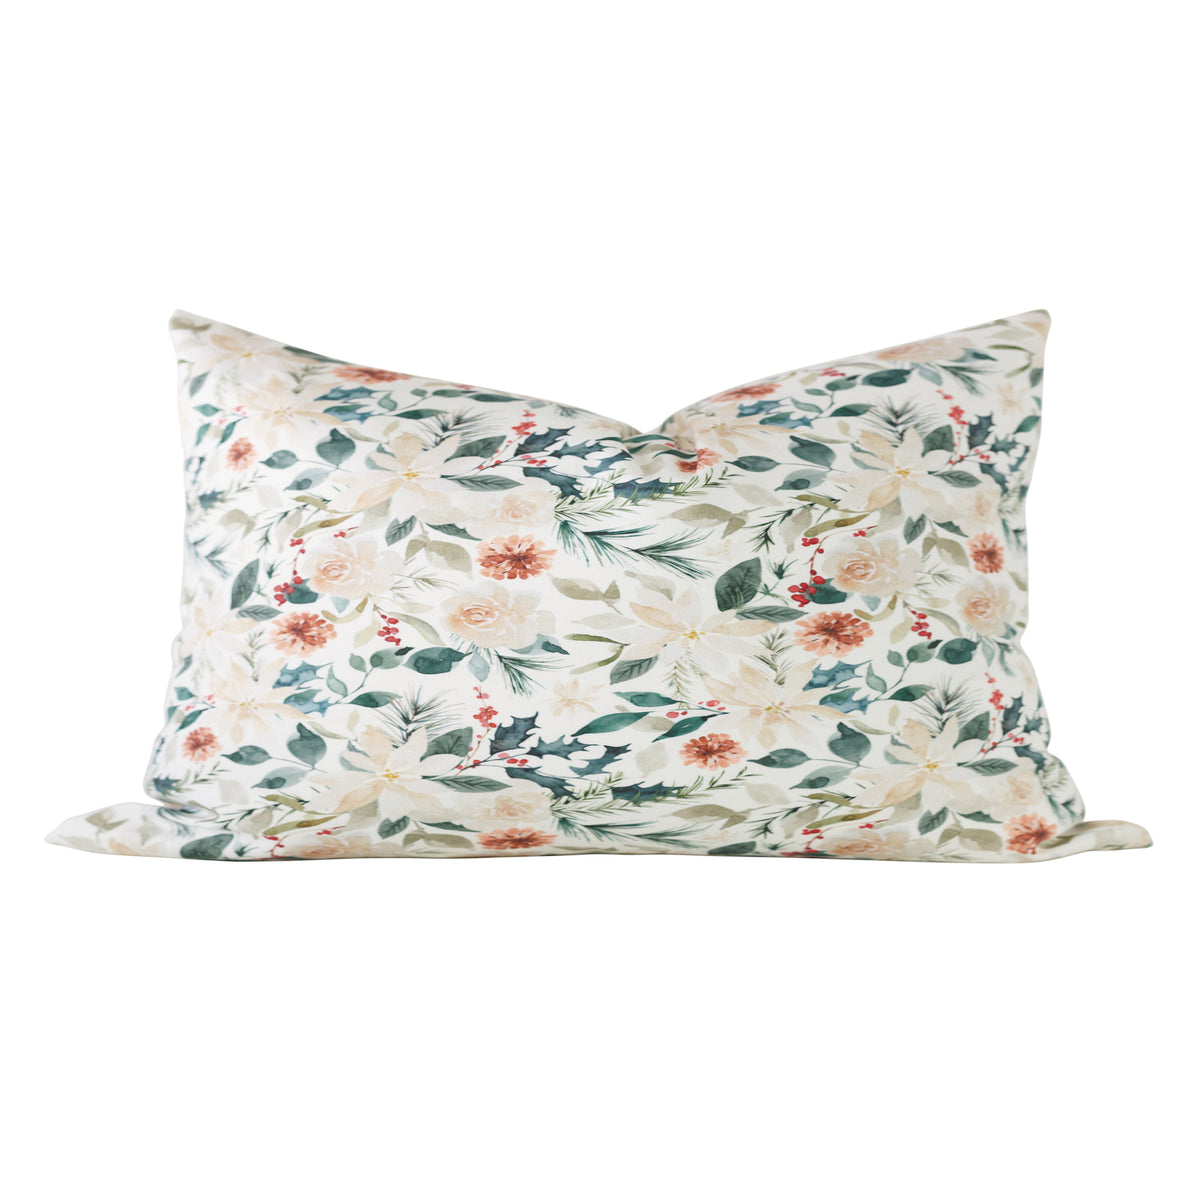 Cheyenne Floral Pillow Cover